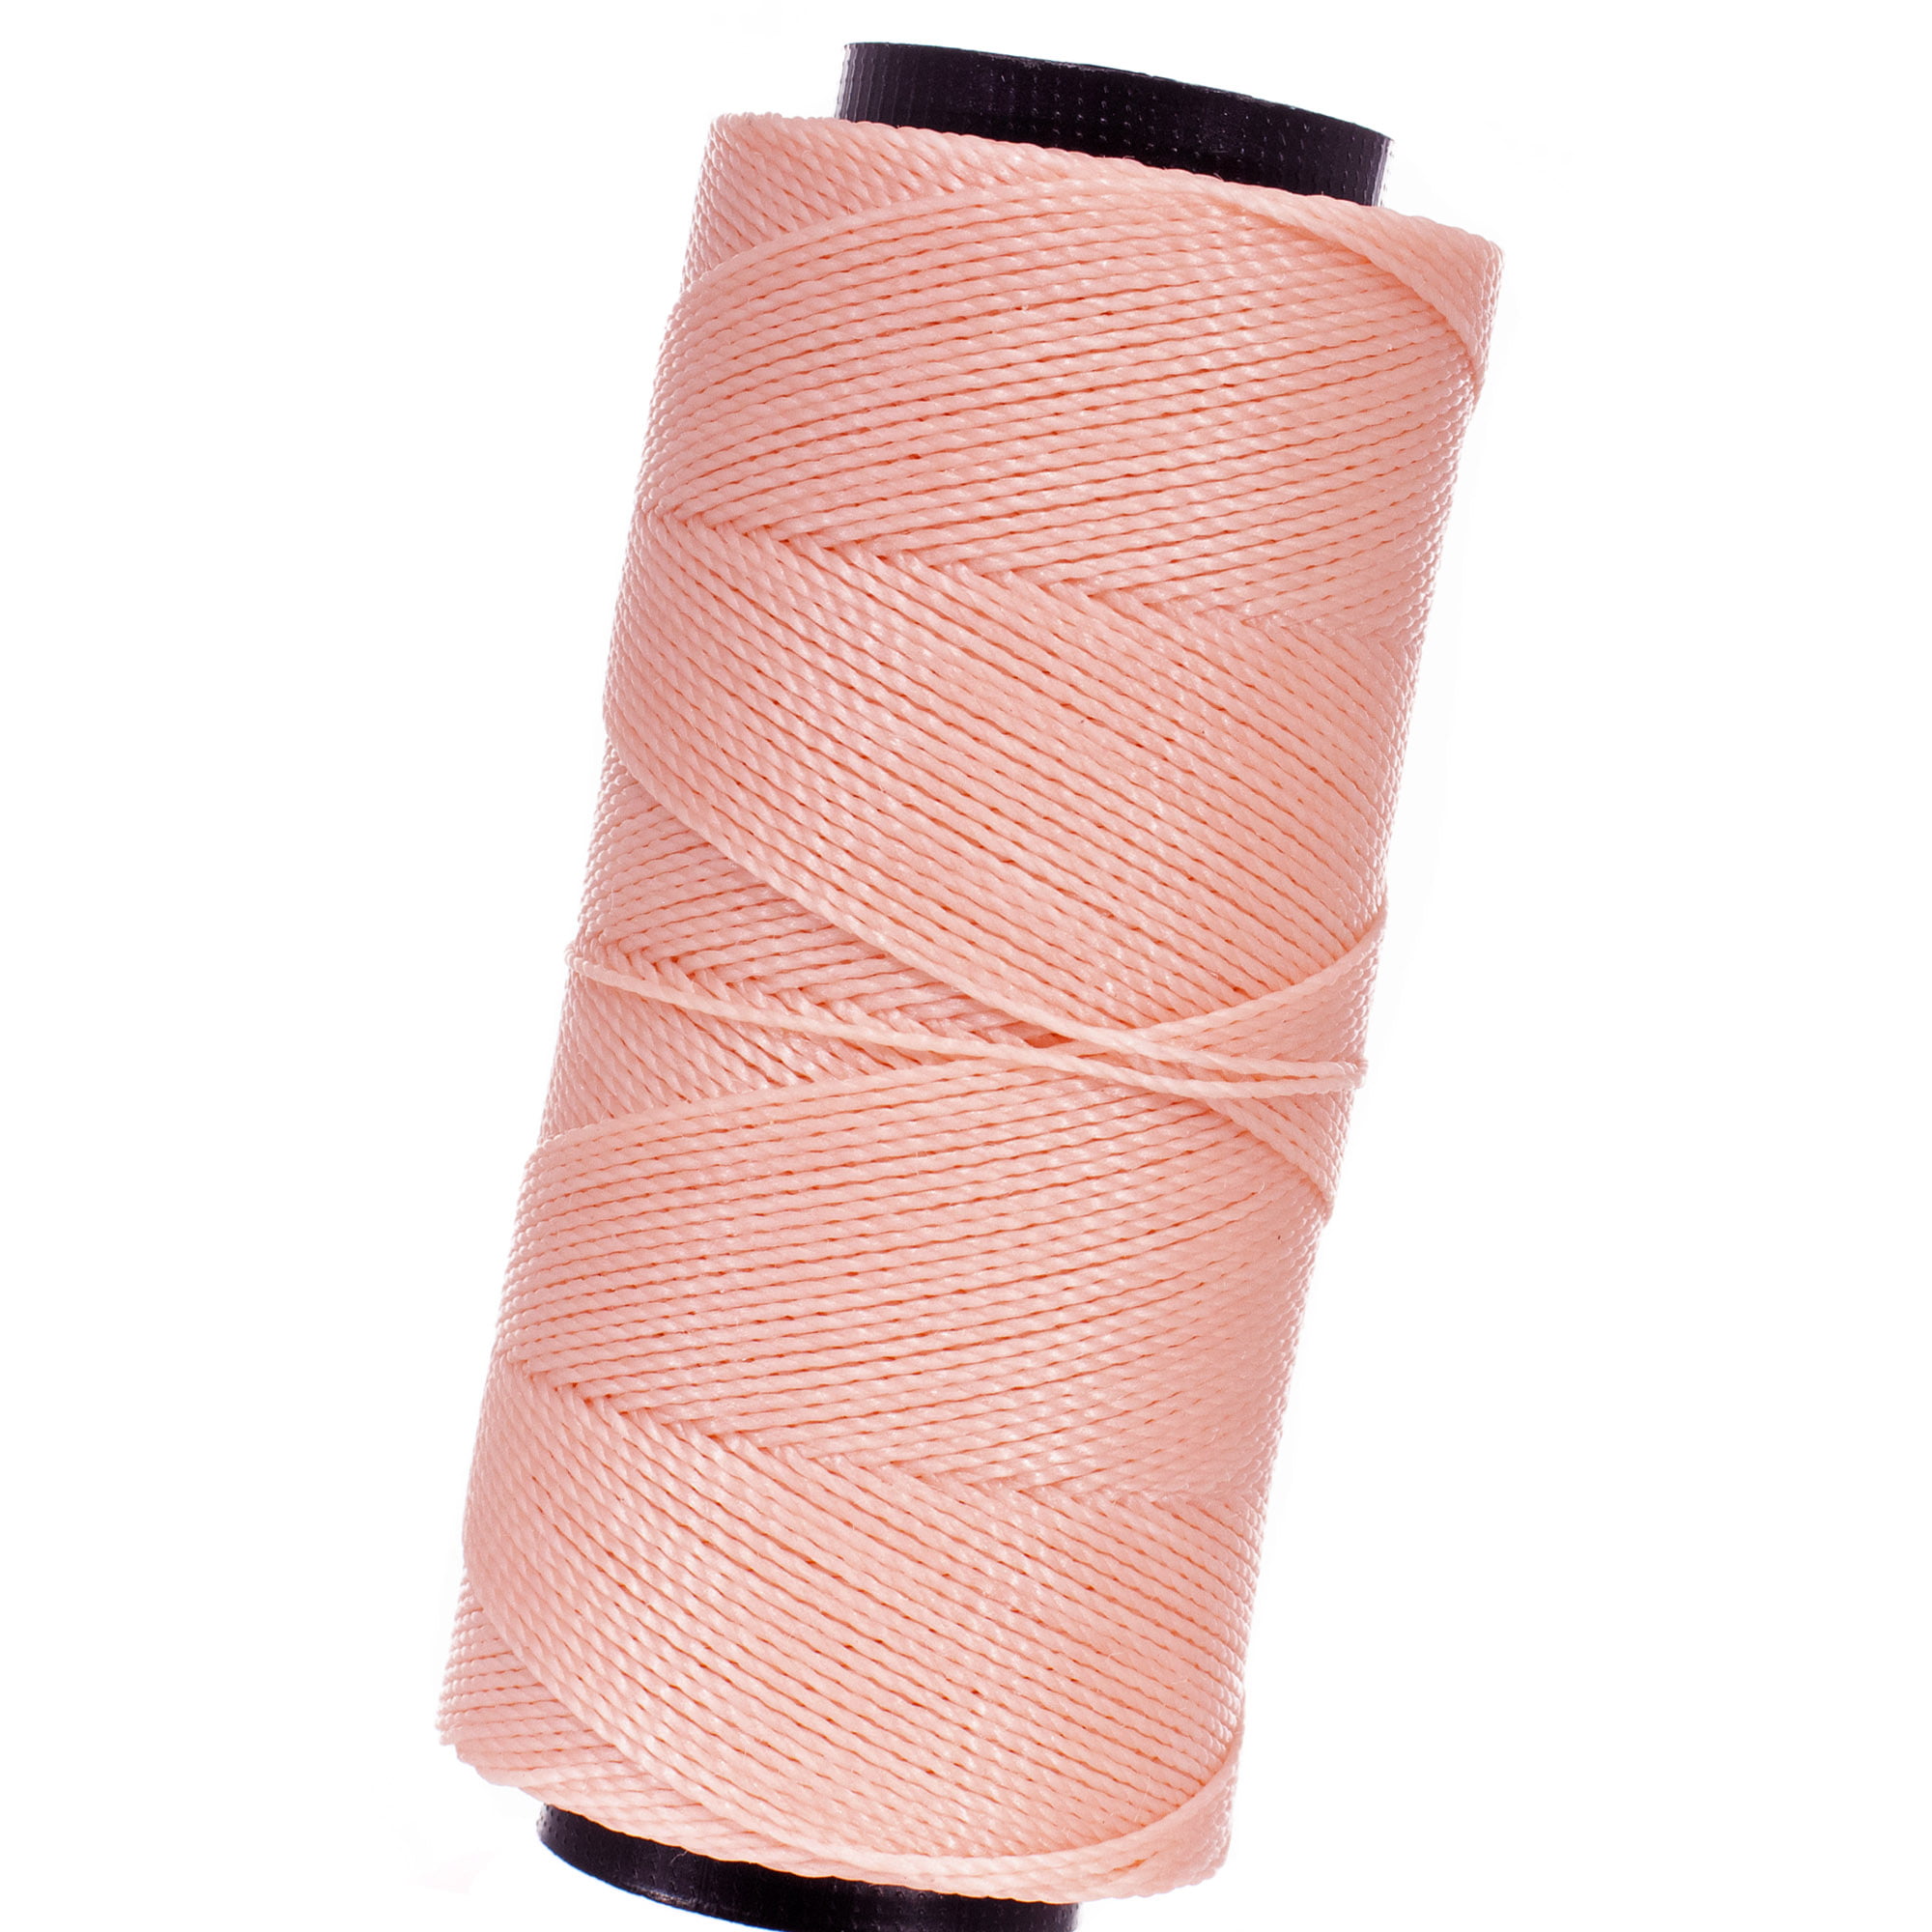 2 play 157 yards Light Pink Brazilian Waxed Polyester Cord 1mm 